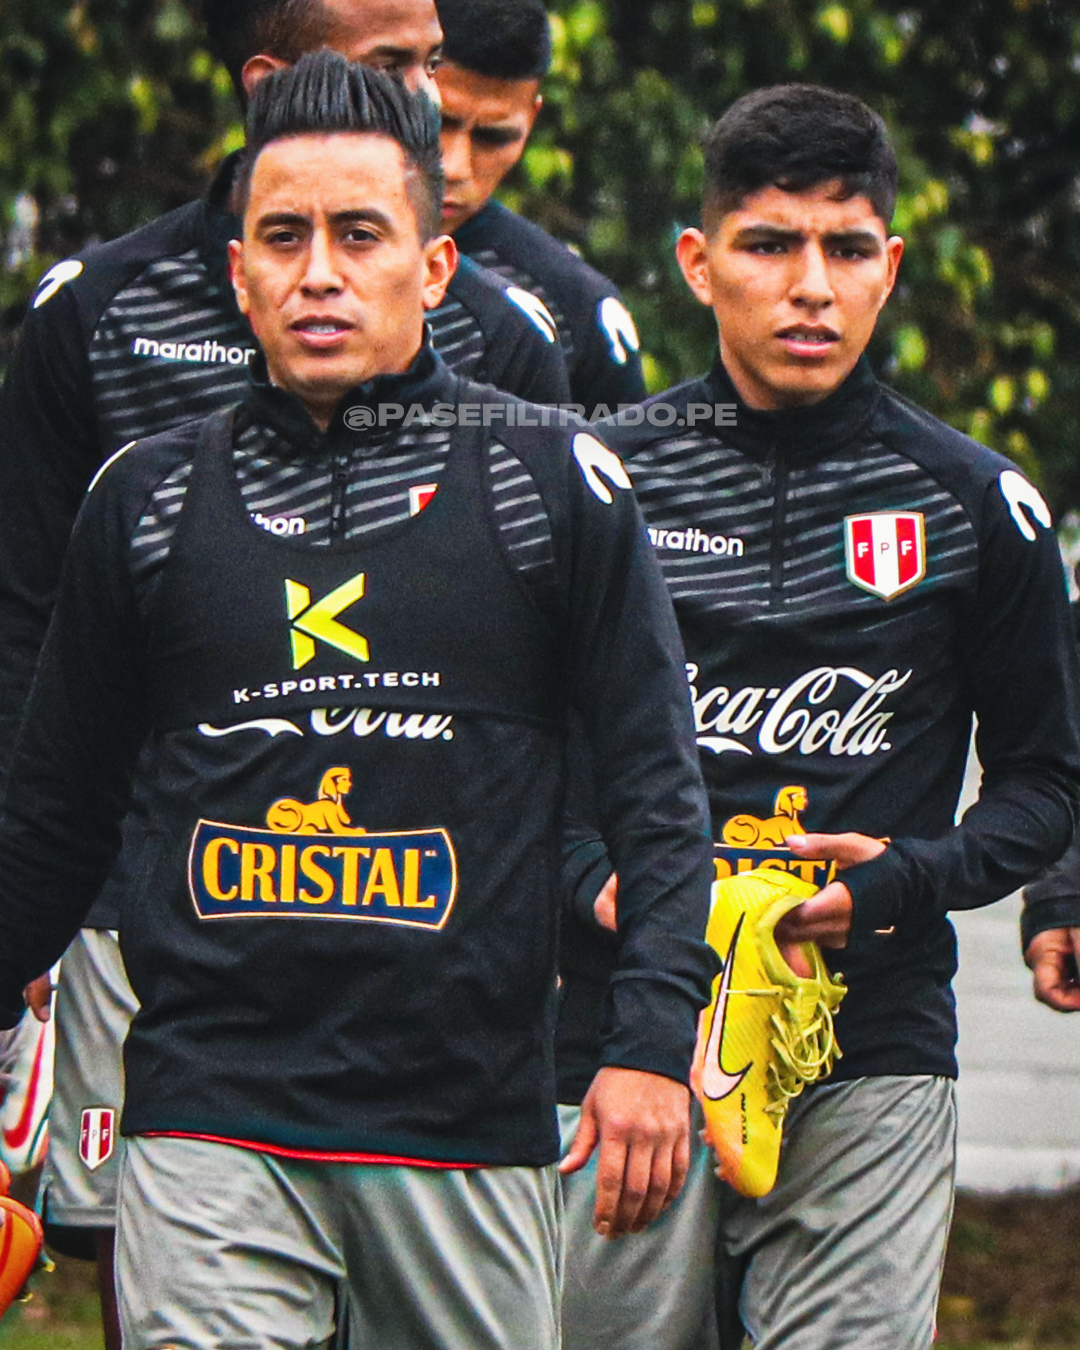 Piero Quispi and Cristian Cueva are active with the Peruvian national team in training (Photo: PASEFILTRADO.PE)